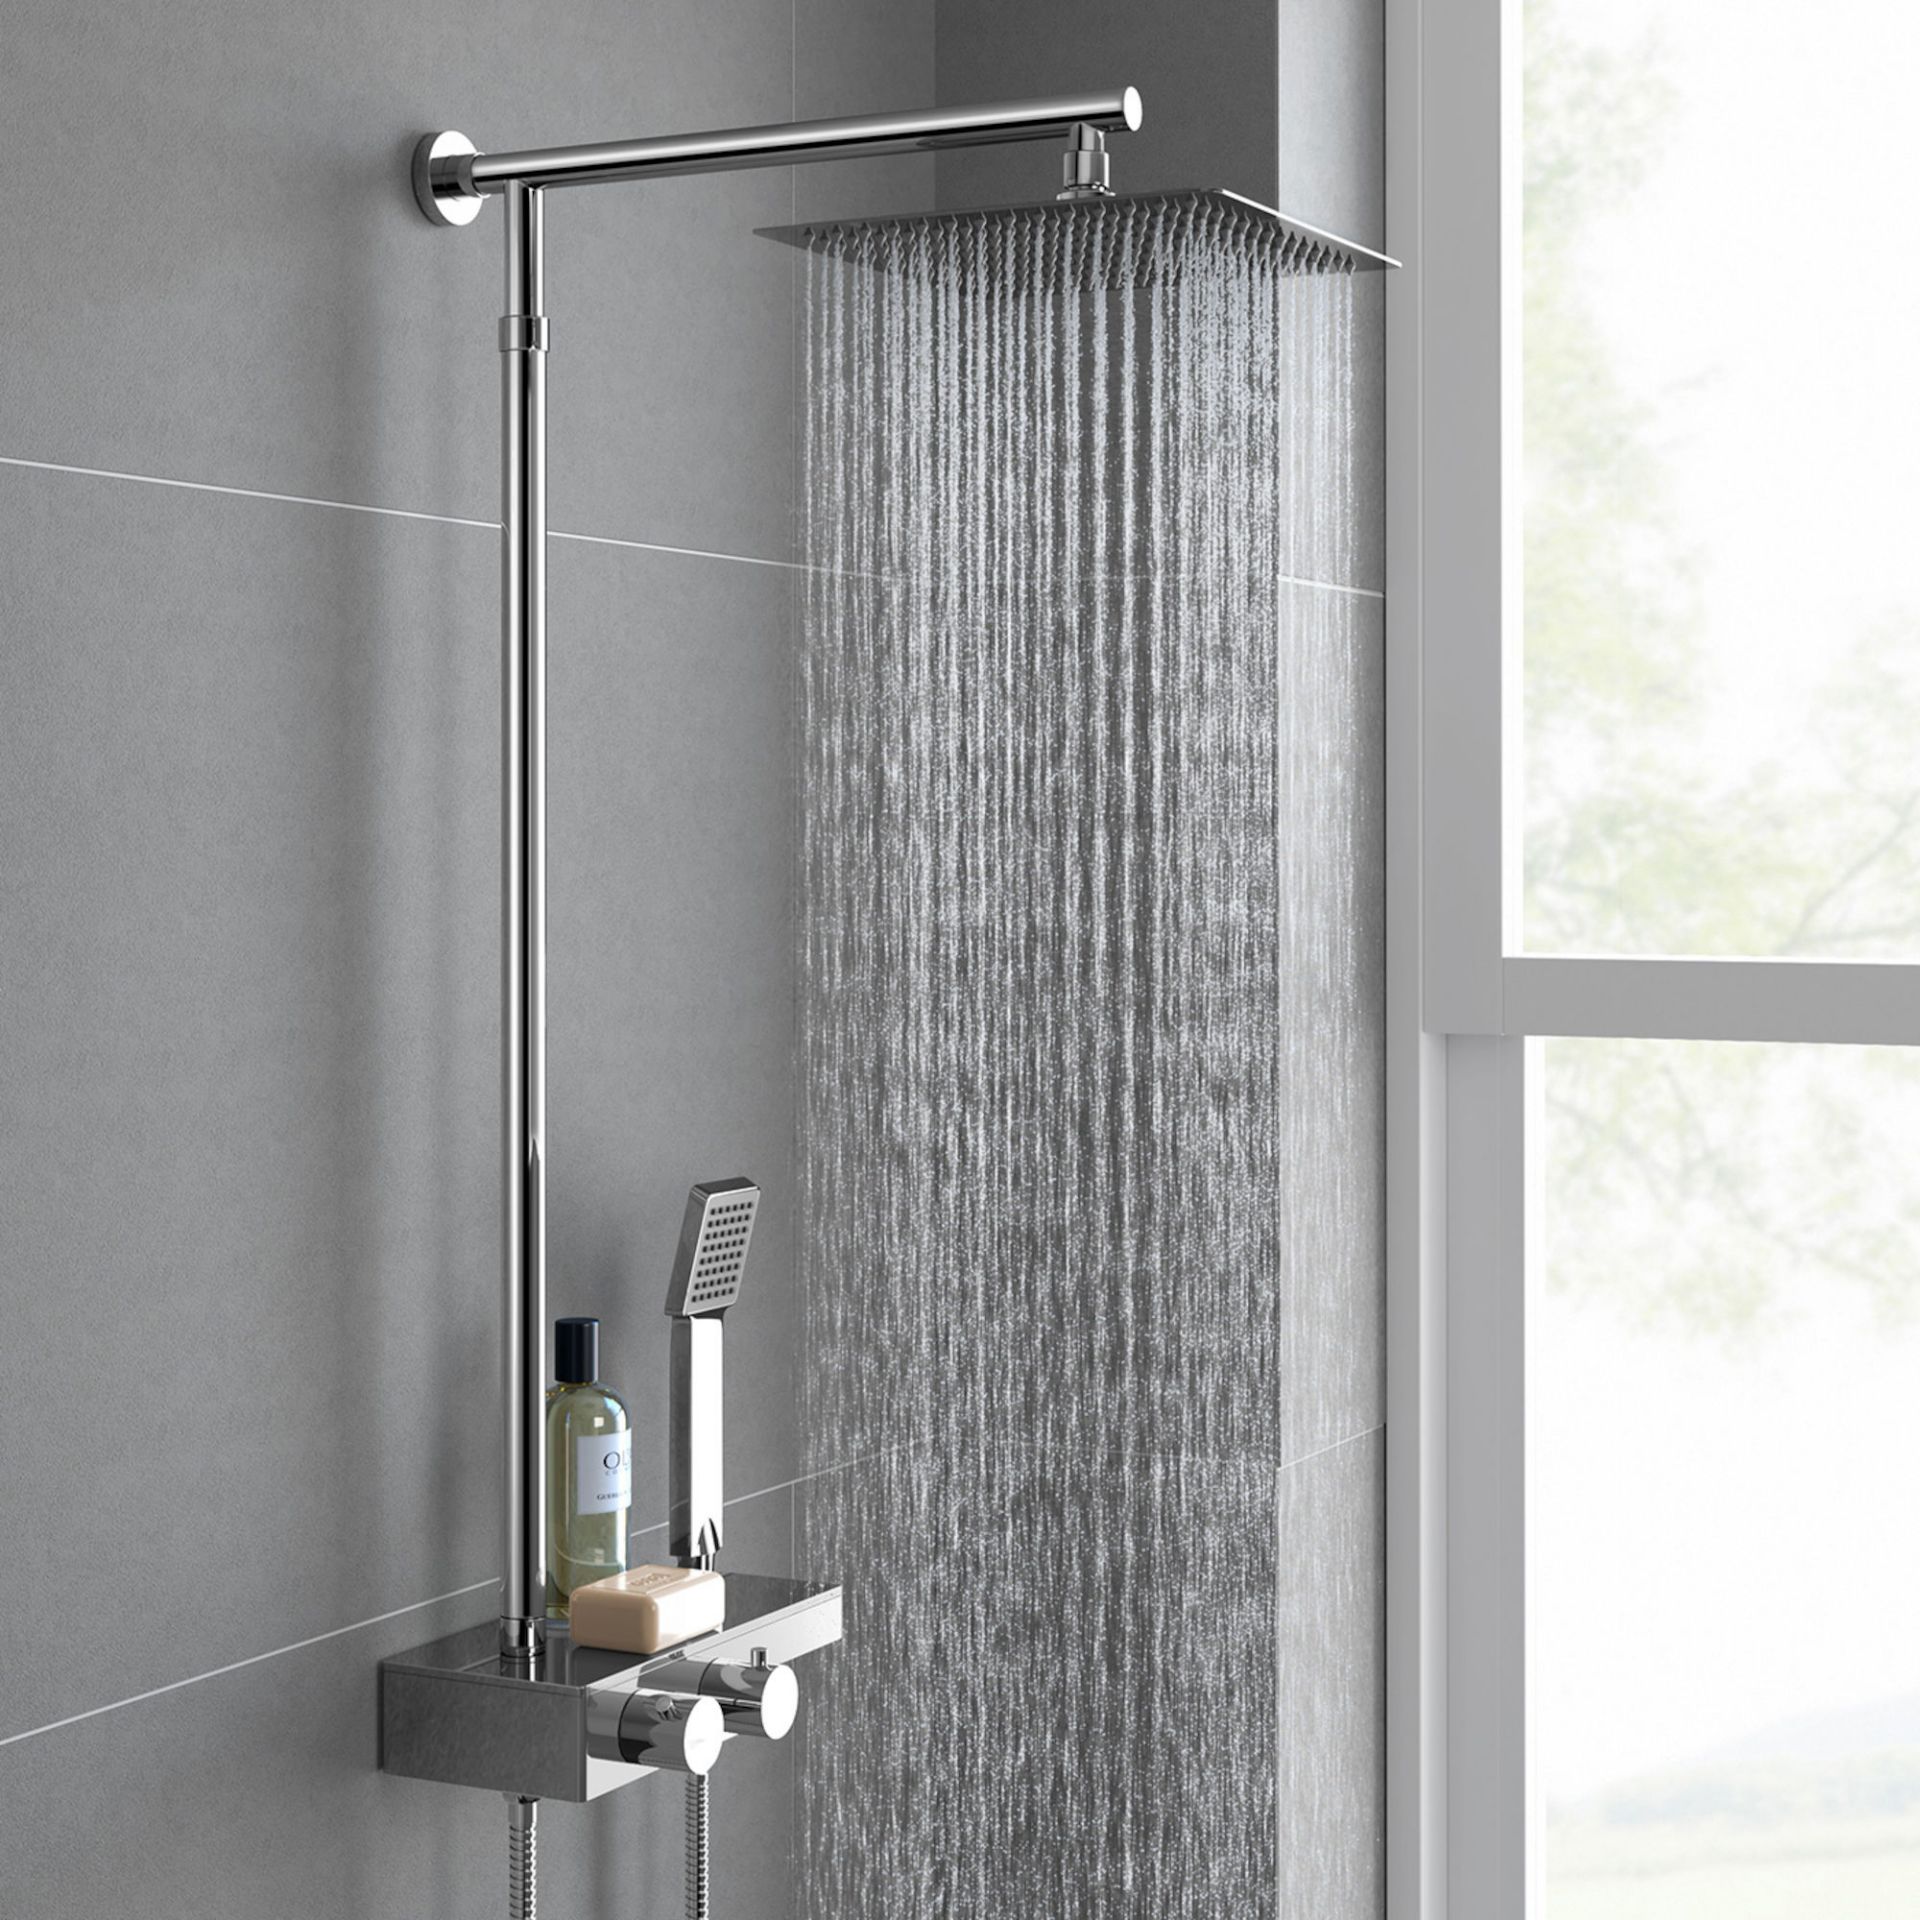 (ZL209) Square Exposed Thermostatic Shower Shelf, Kit & Large Head. RRP £349.99. Style meets